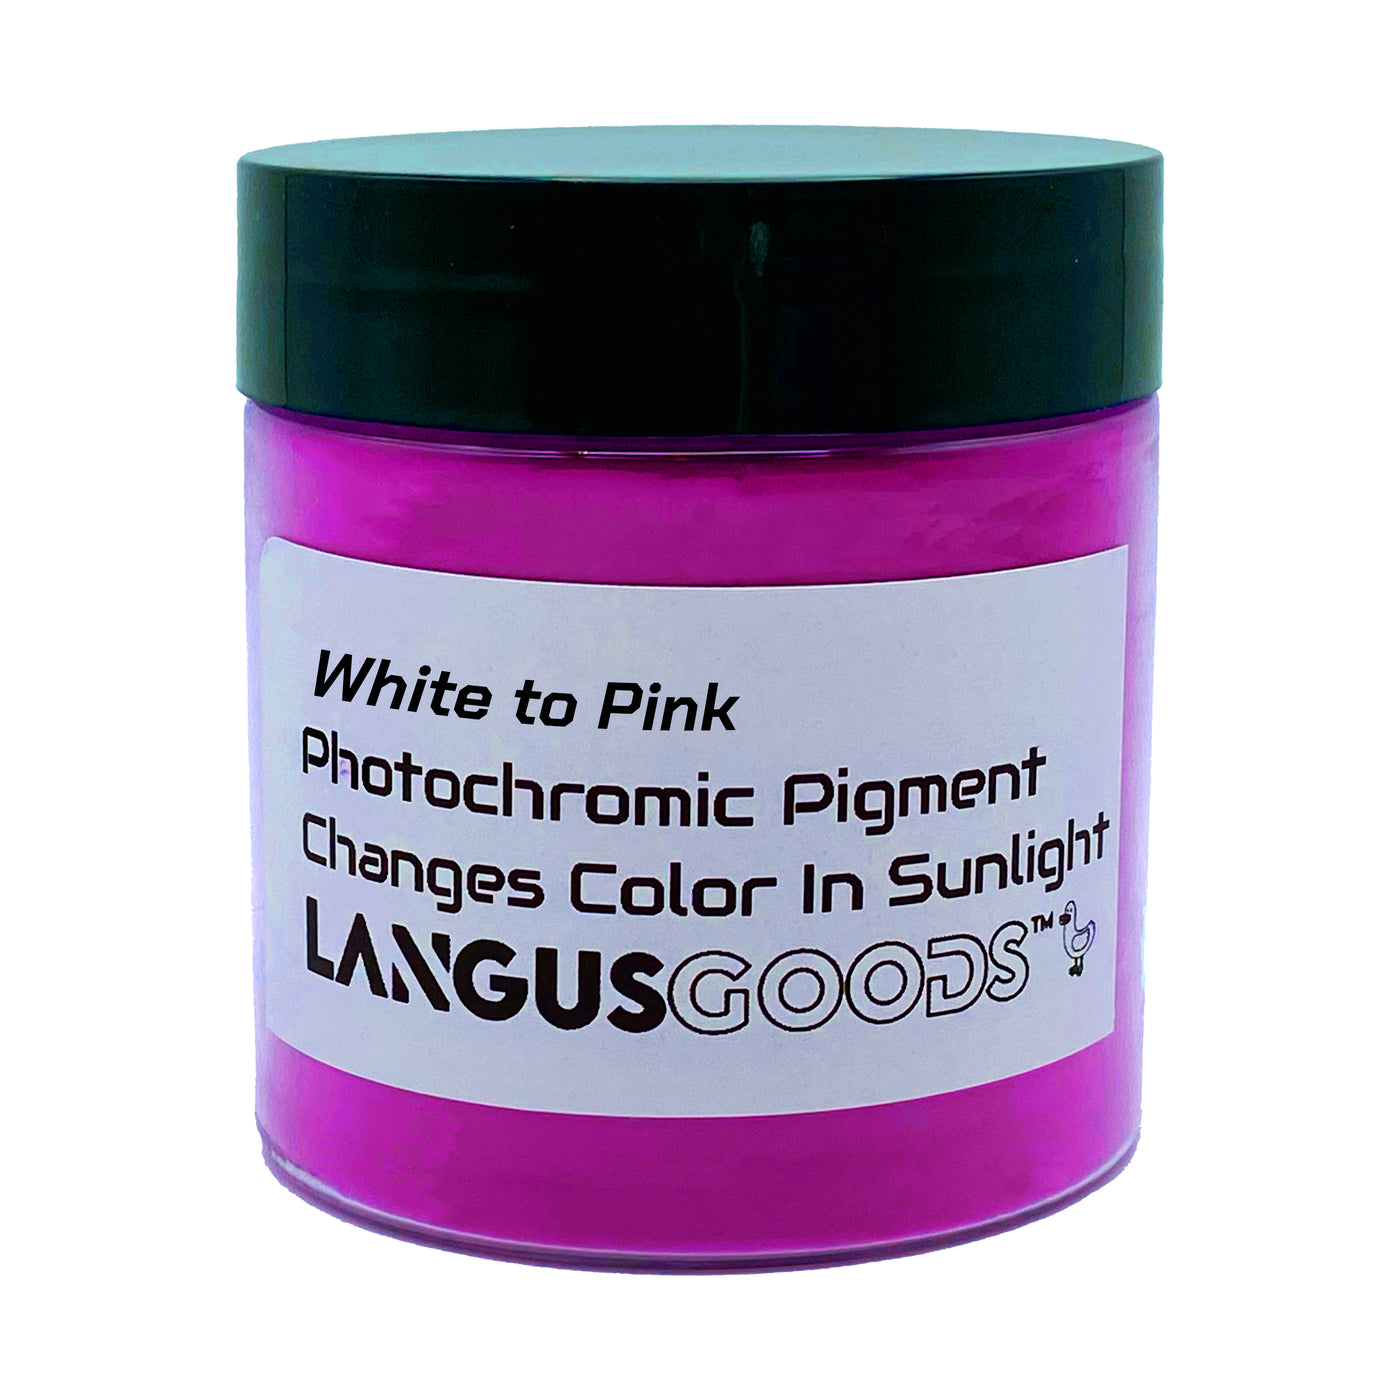 White to Pink - Photochromic Pigment Powder (Changes Color In Sunlight)